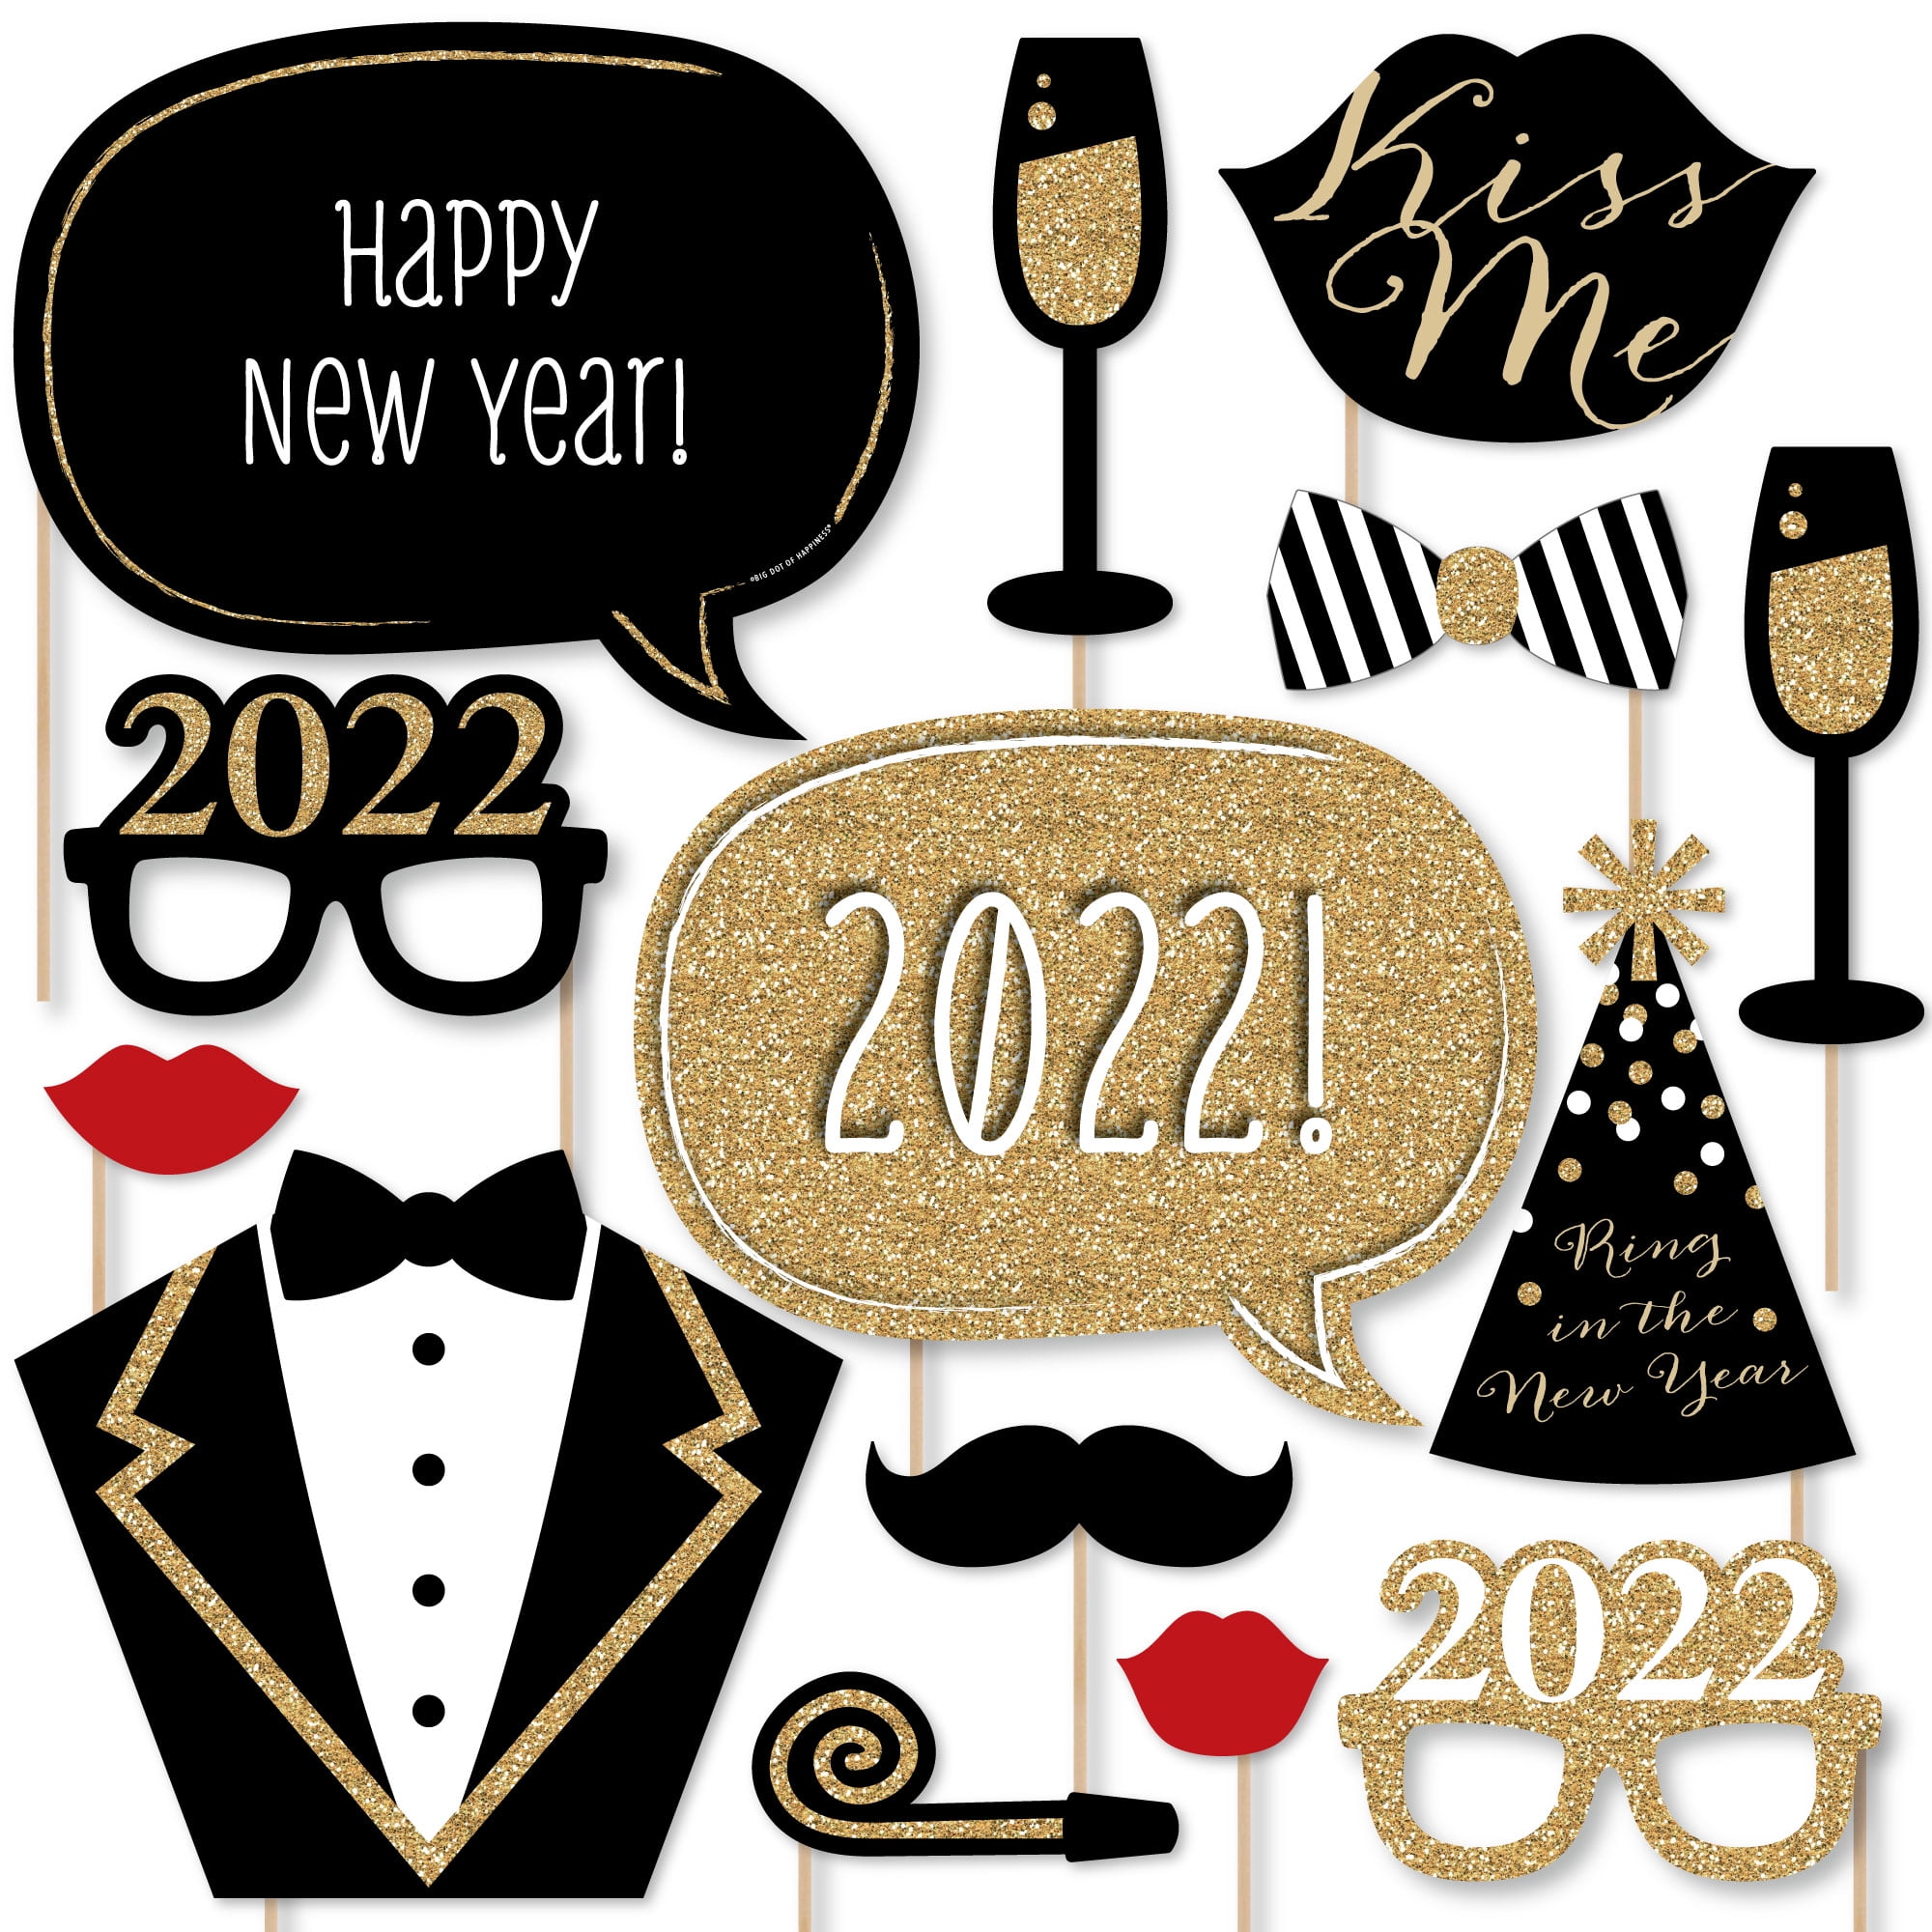 Pack of 35 New Years Eve Party Supplies 2022 New Years Eve Photo Booth Props New Years Photo Props for 2022 New Years Decorations New Years Photo Booth Props Happy New Year Decorations 2022